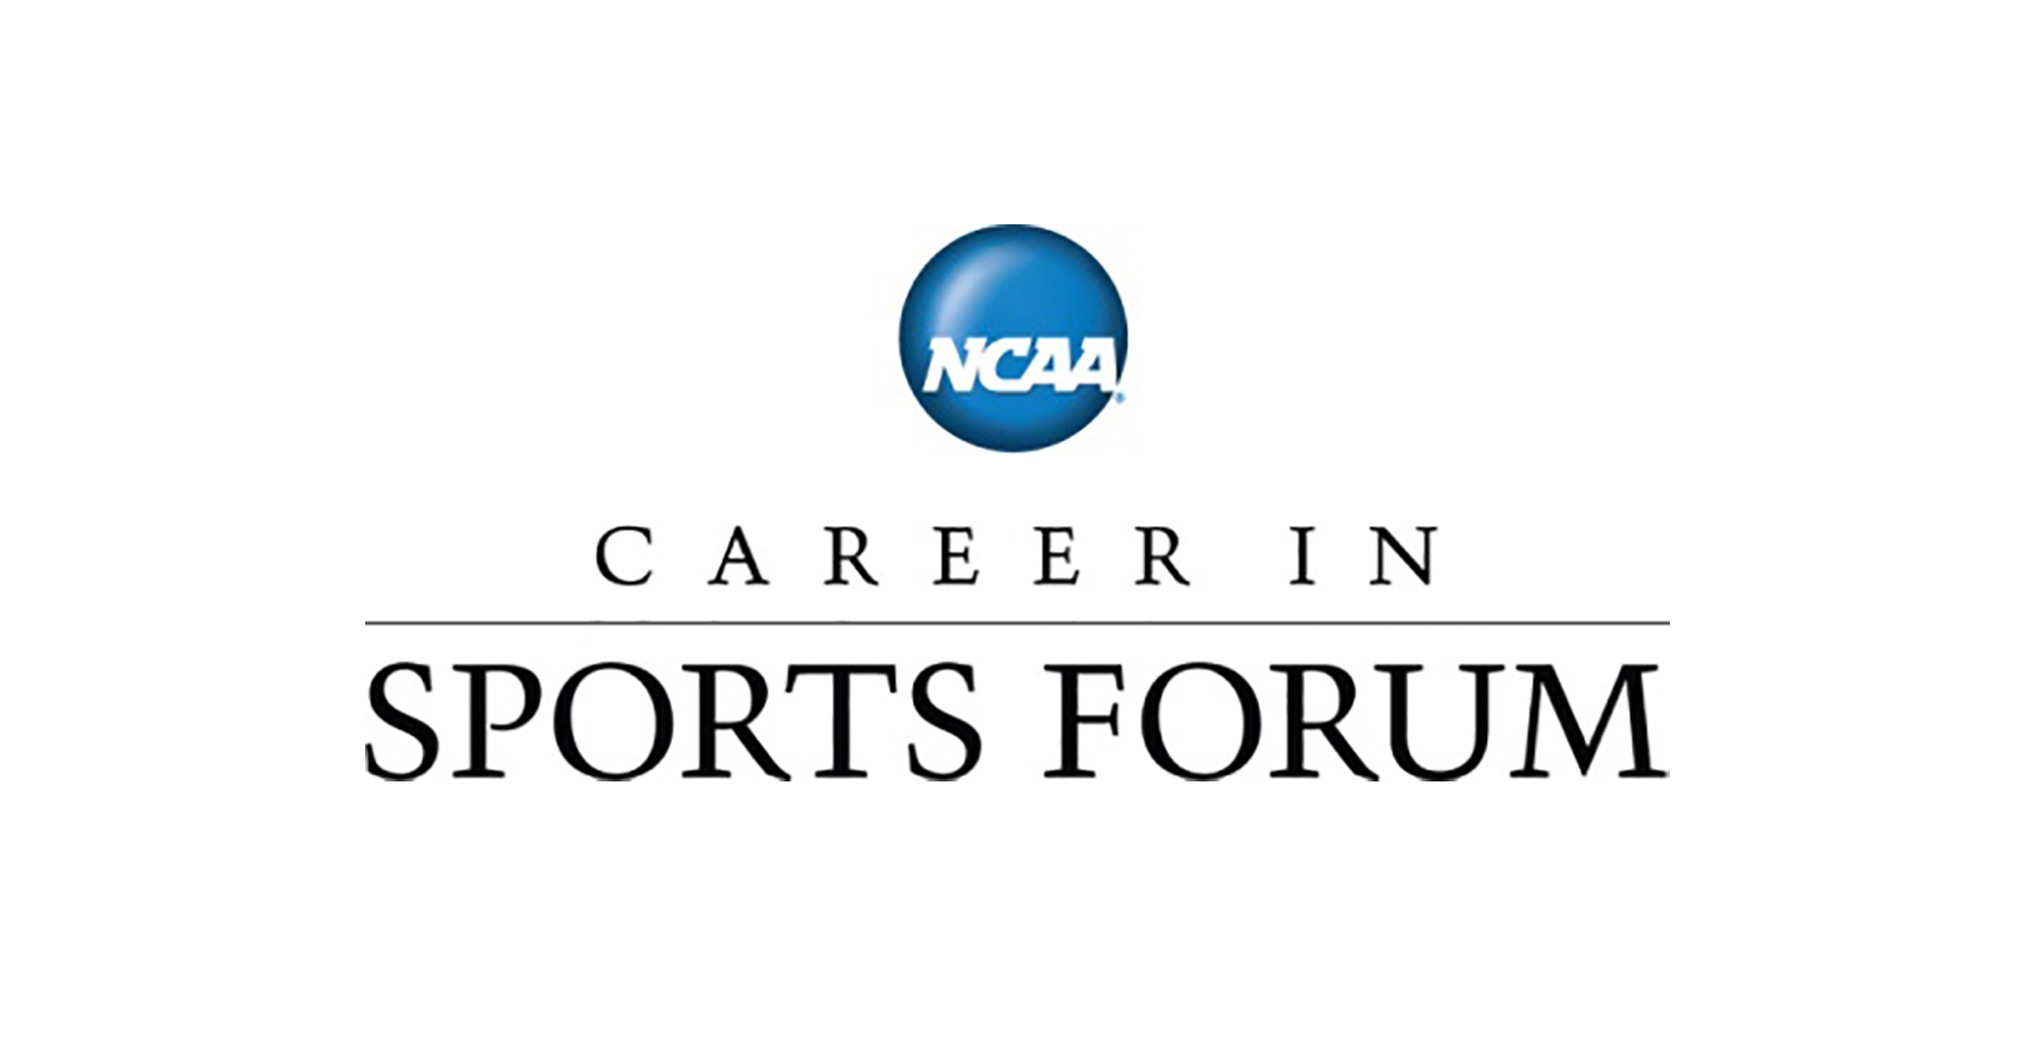 Two Oilers Participating in NCAA Career in Sports Forum